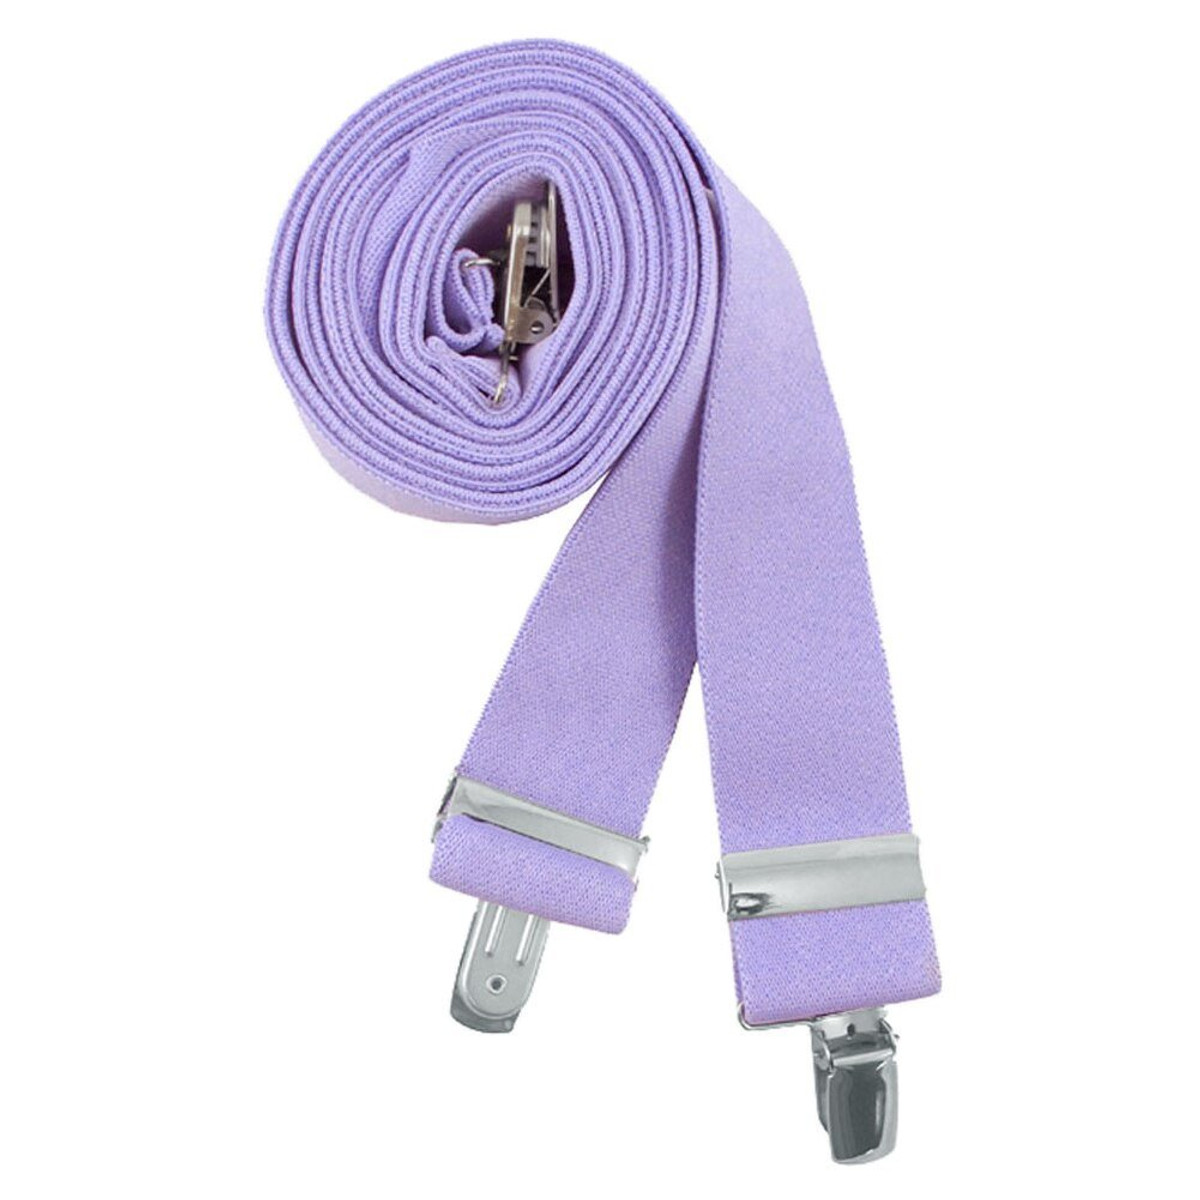 Men's Solid Suspenders - X-Back - 48 inches Long - 1.5 inch Straps - Pre-Tied Clip-On - Lilac